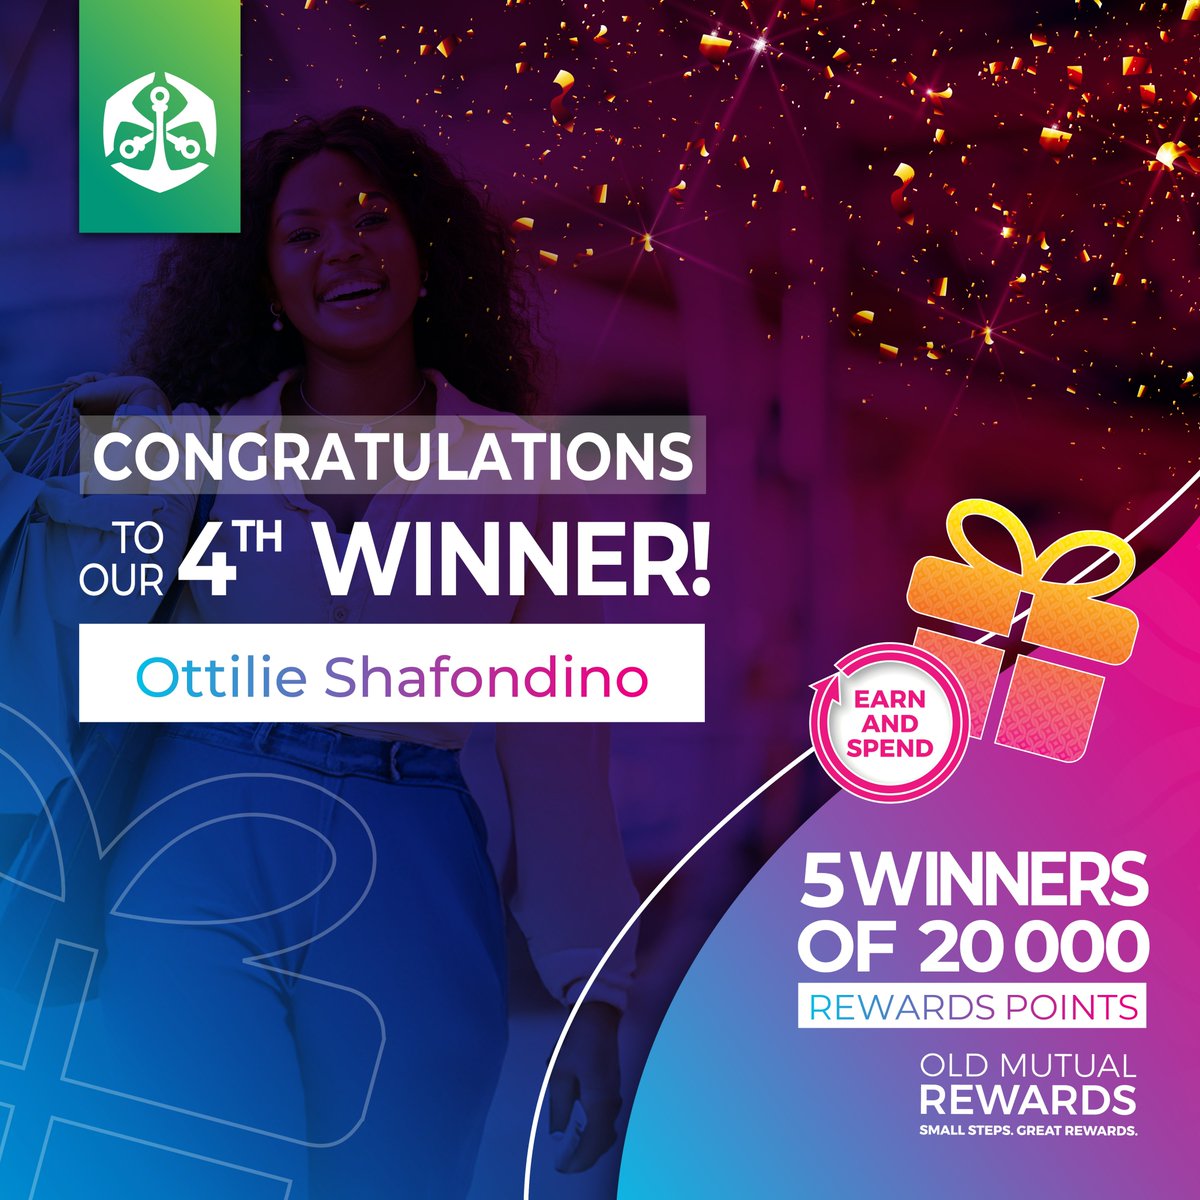 🌟 Another winner in the house! 🎉 Congratulations on scoring 20 000 rewards points, courtesy of Old Mutual Rewards! 💰 Your future just got a little brighter – keep aiming high and enjoy your well-deserved prize! #TreatYourself #WinnerAlert #OldMutualNamibia